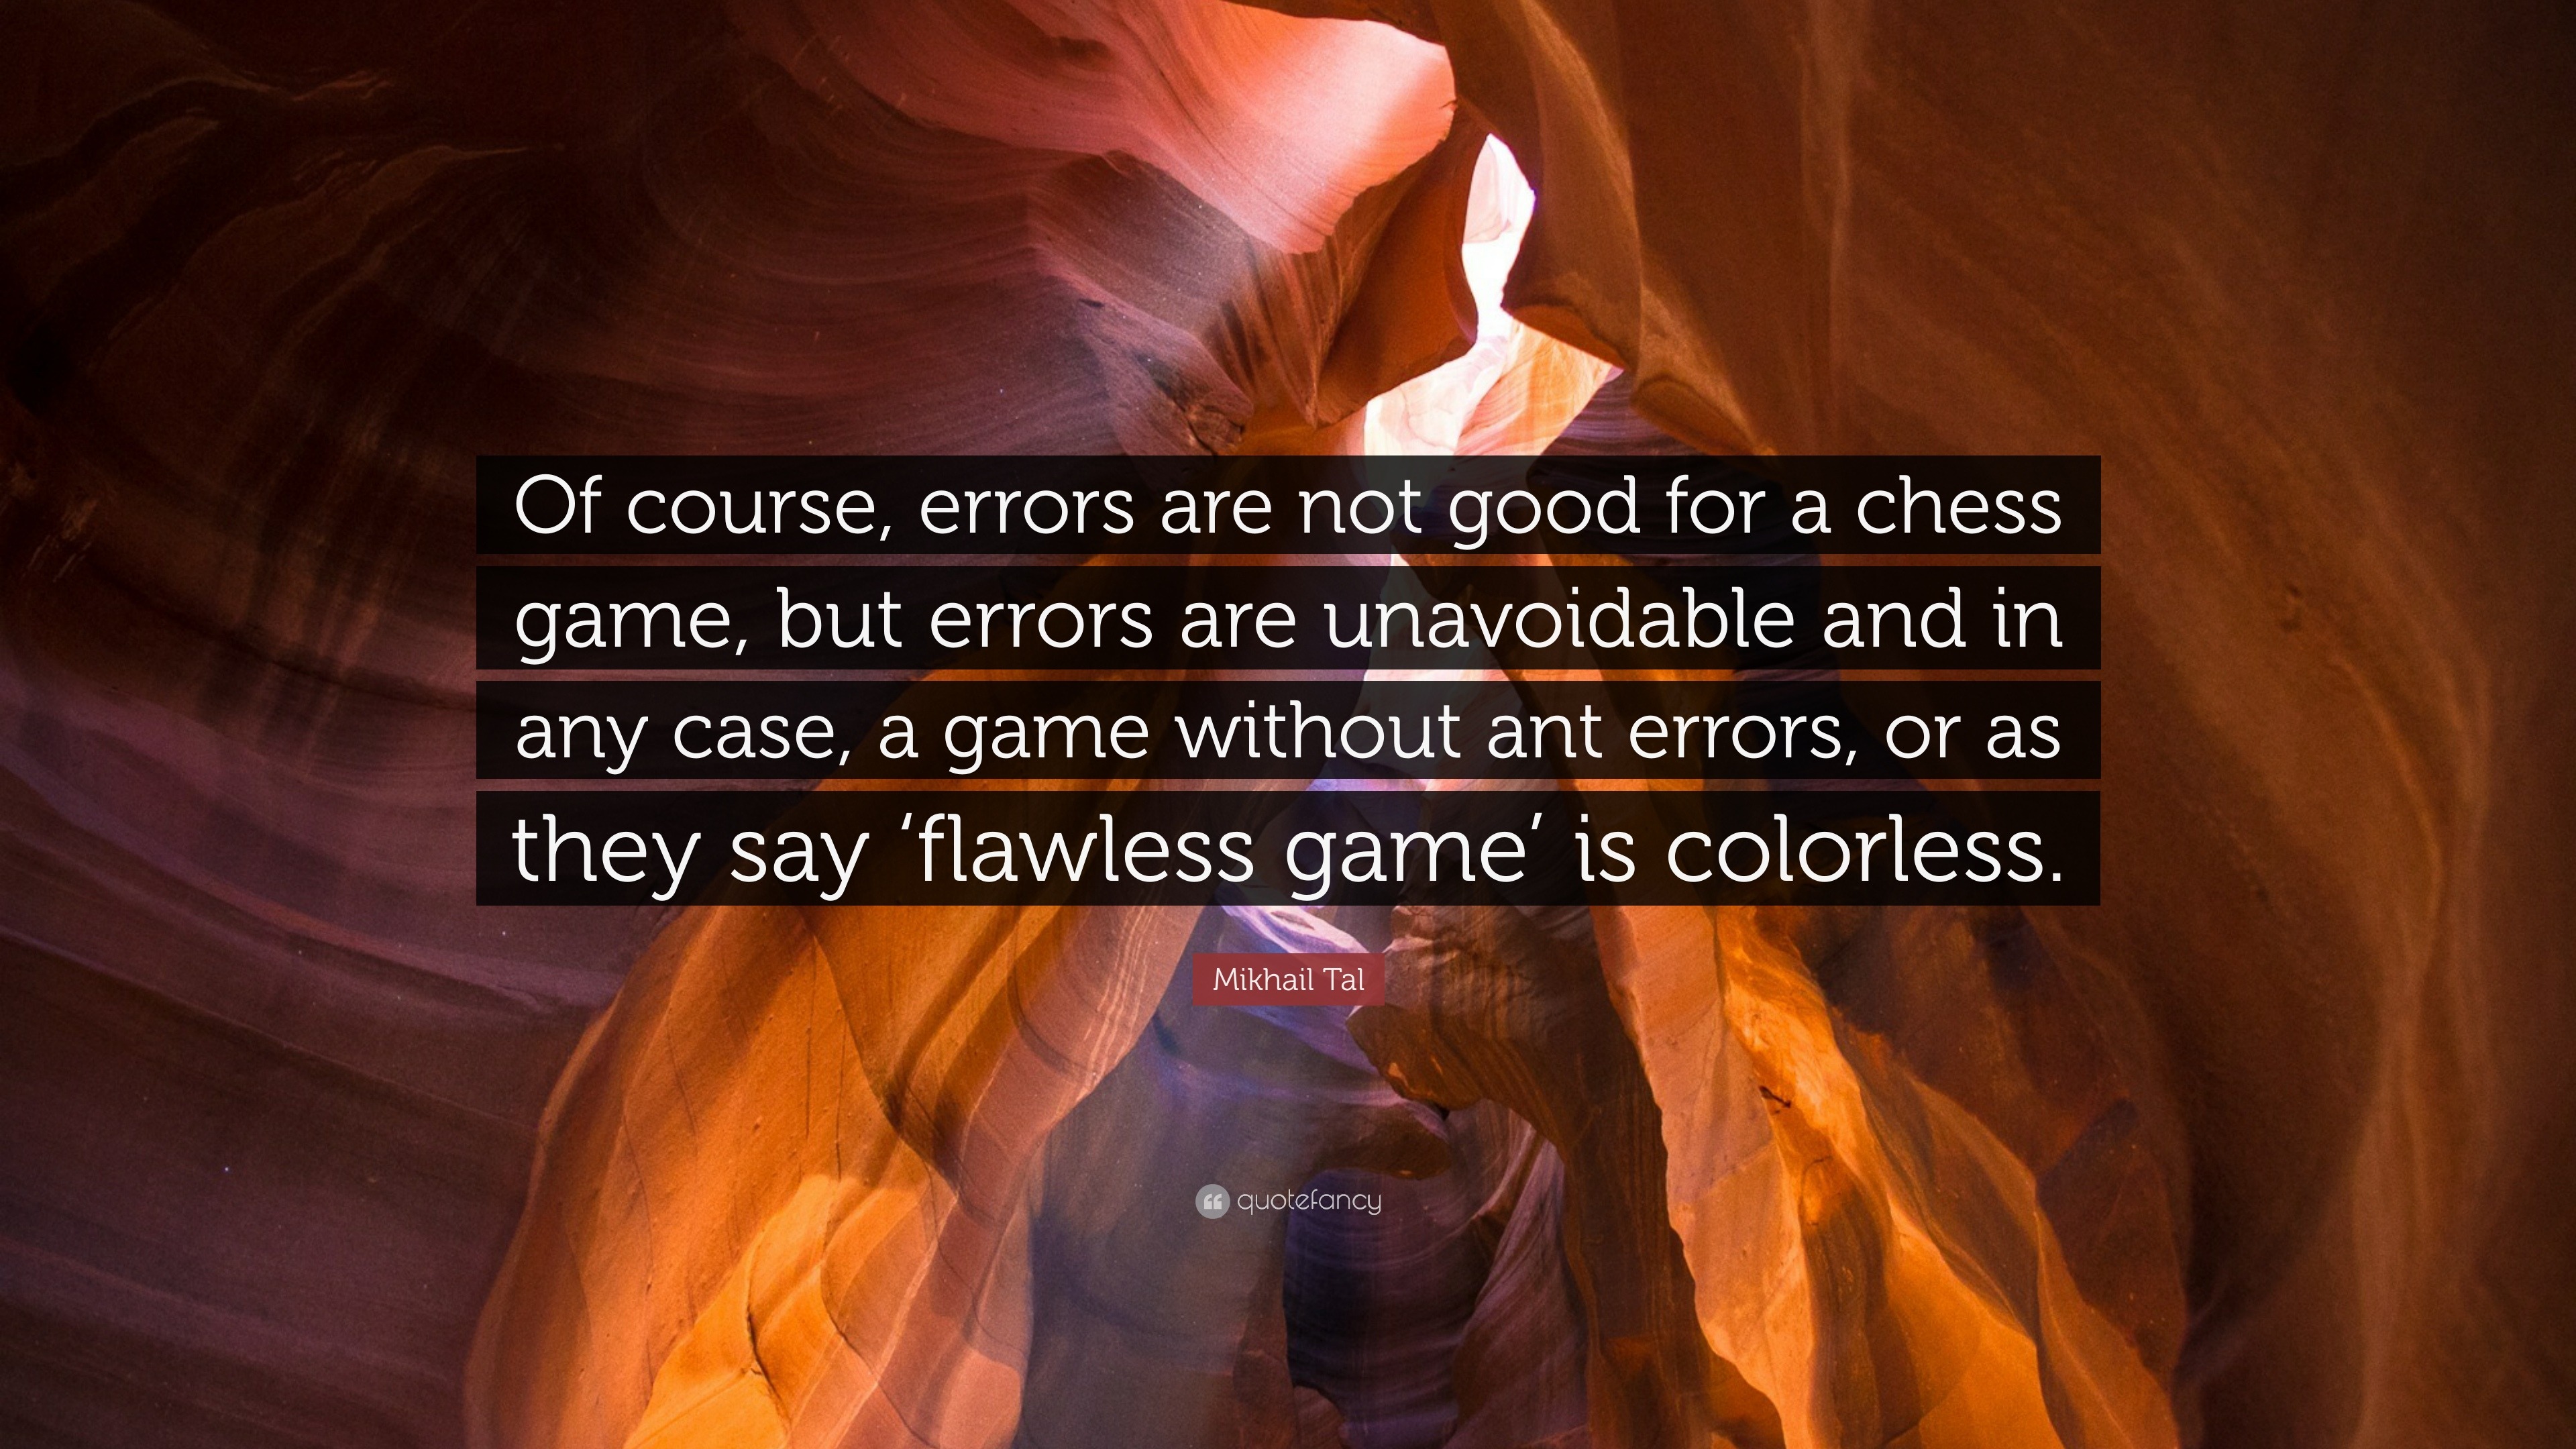 Mikhail Tal Quote: “Of course, errors are not good for a chess game, but  errors are unavoidable and in any case, a game without ant errors, ”